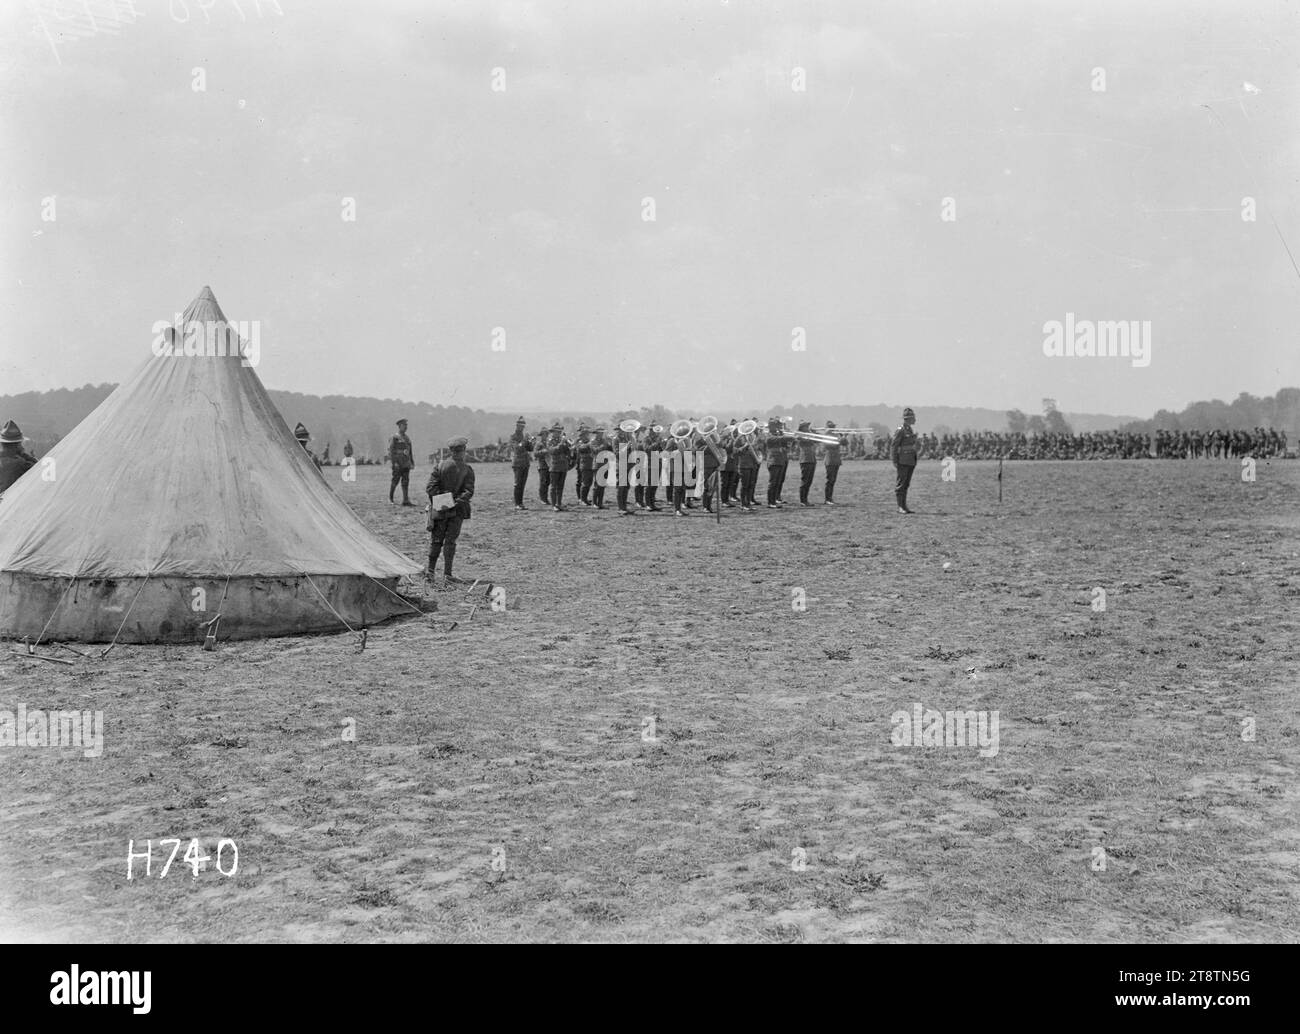 The judges tent at the New Zealand Divisional Band Contest, Authie, France, The judge's tent at the New Zealand Divisional Band Contest held in Authie during World War I. Beyond it a band plays before the judge who stands outside the tent. Photograph taken 27 July 1918 Stock Photo